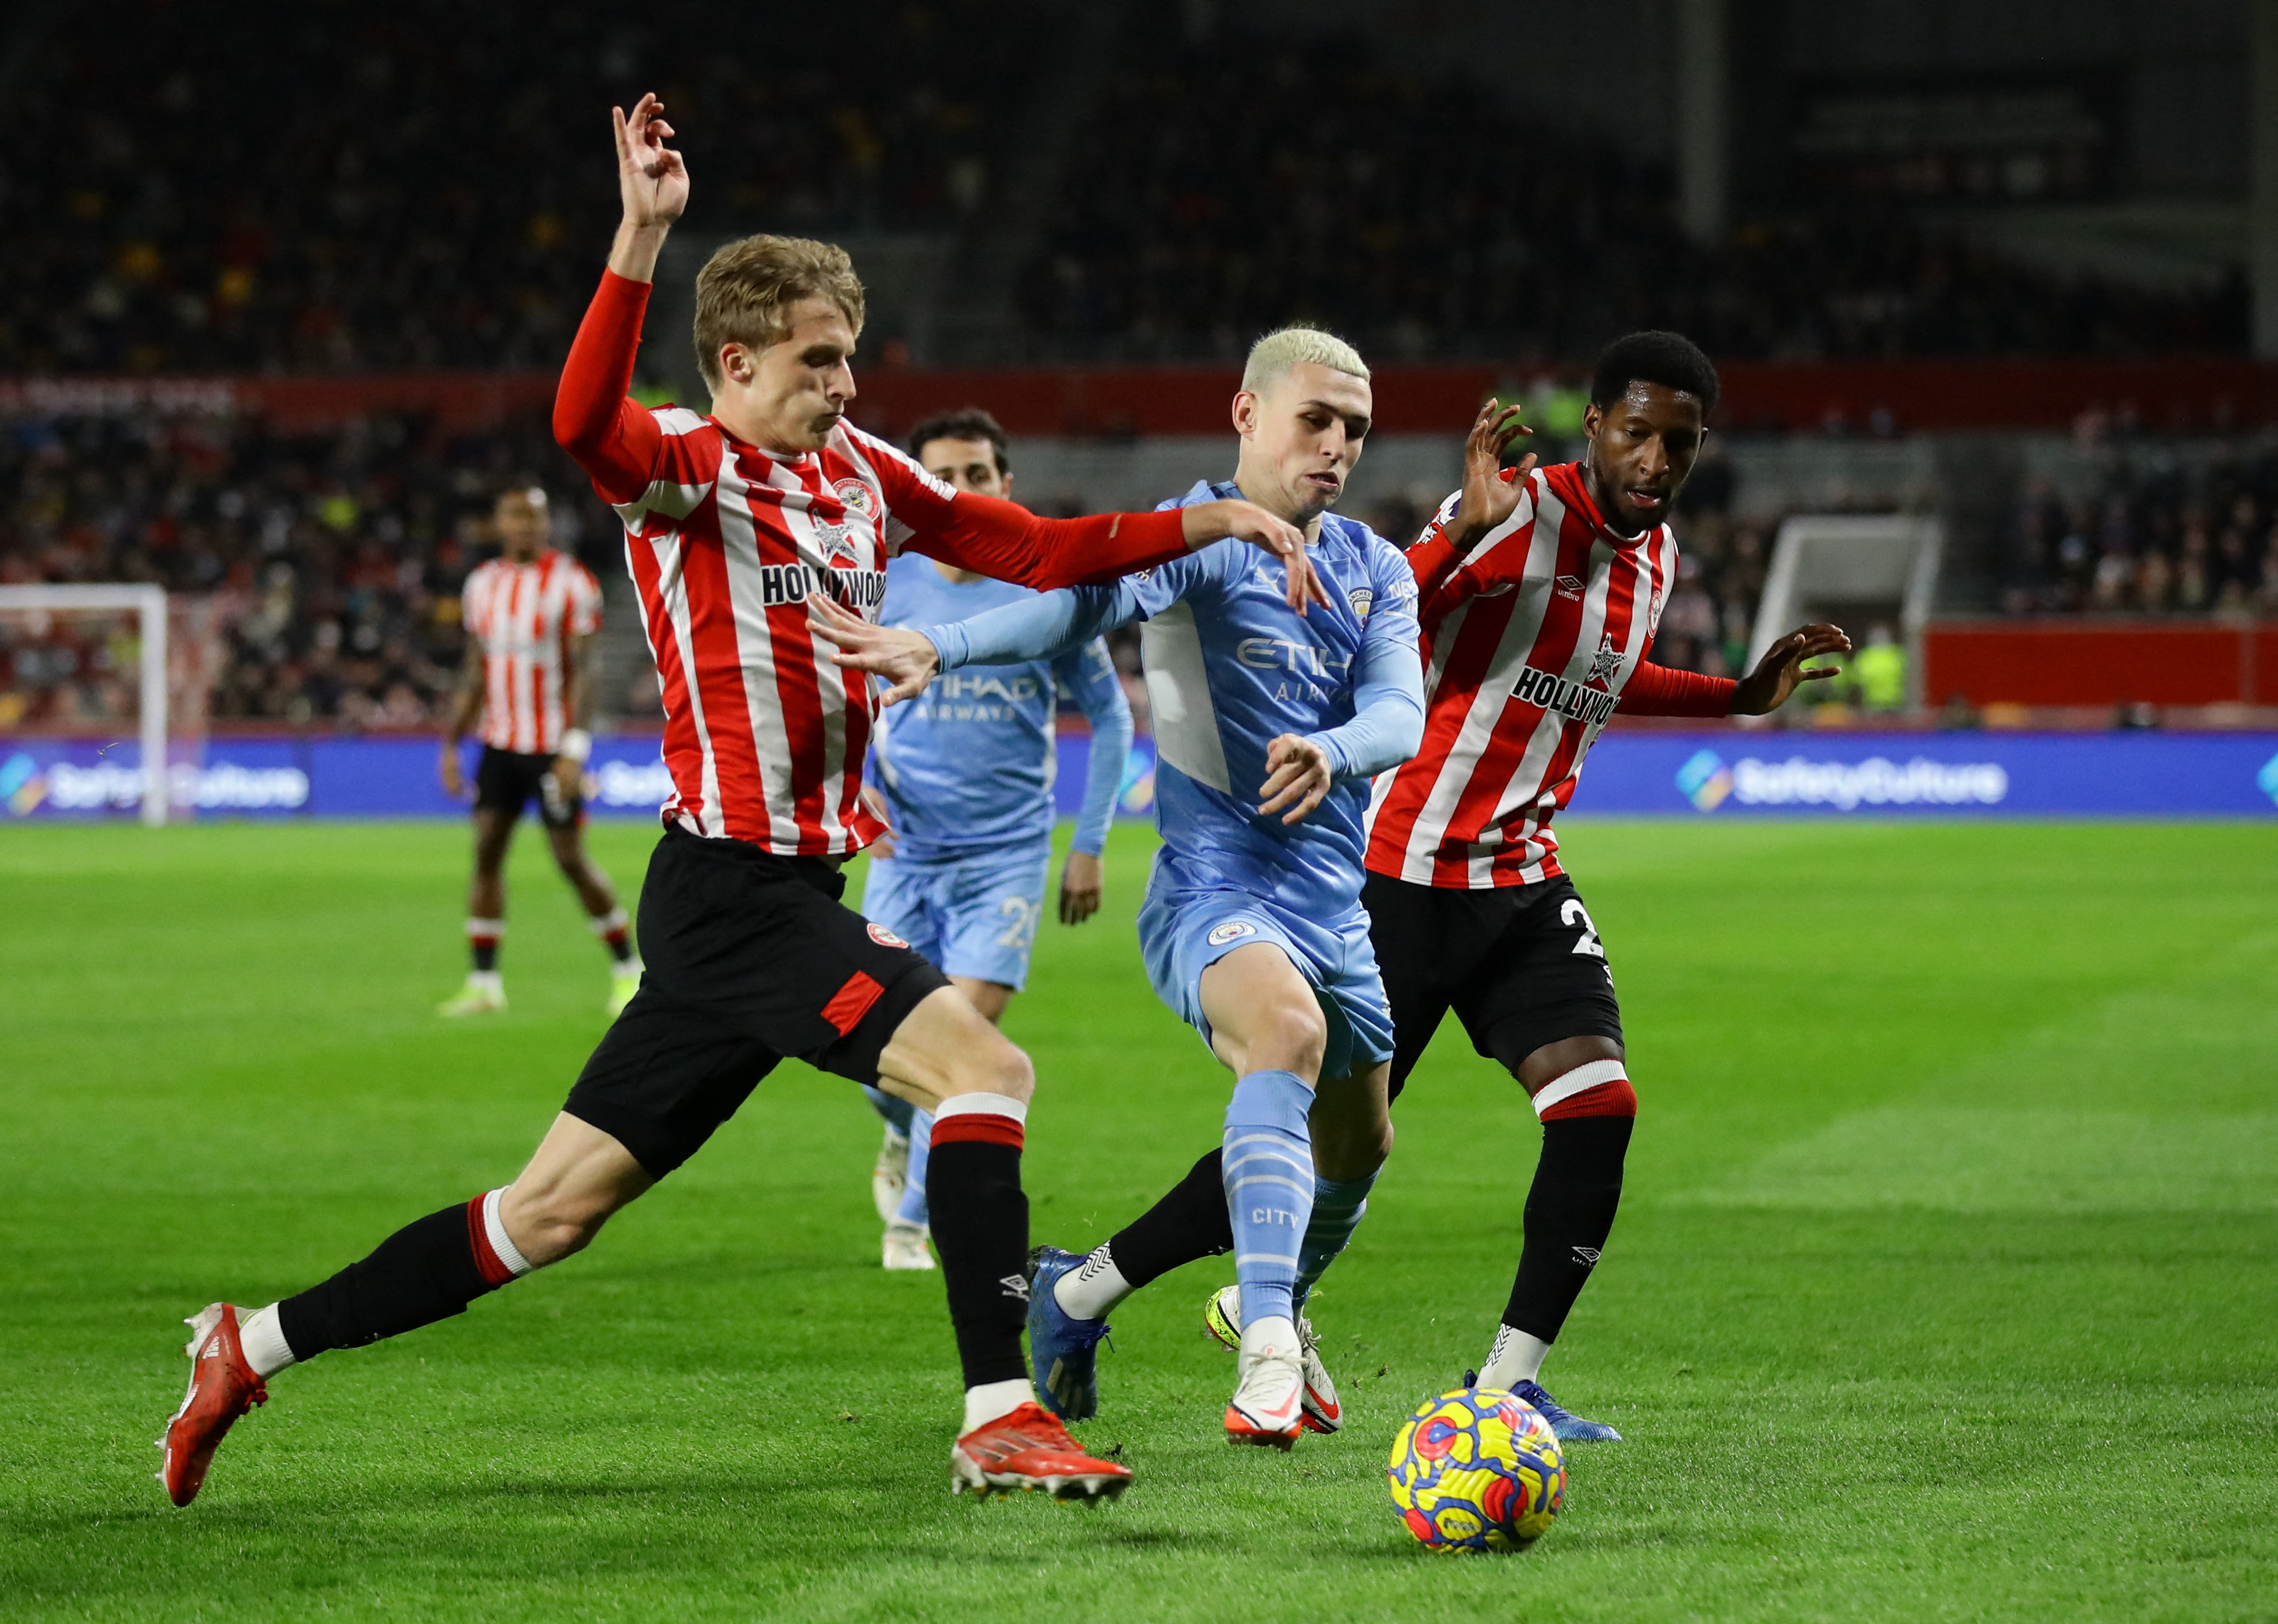 Manchester City vs Brentford Live: When and where to watch Premier League MCI vs BRE LIVE Streaming in your country, India?